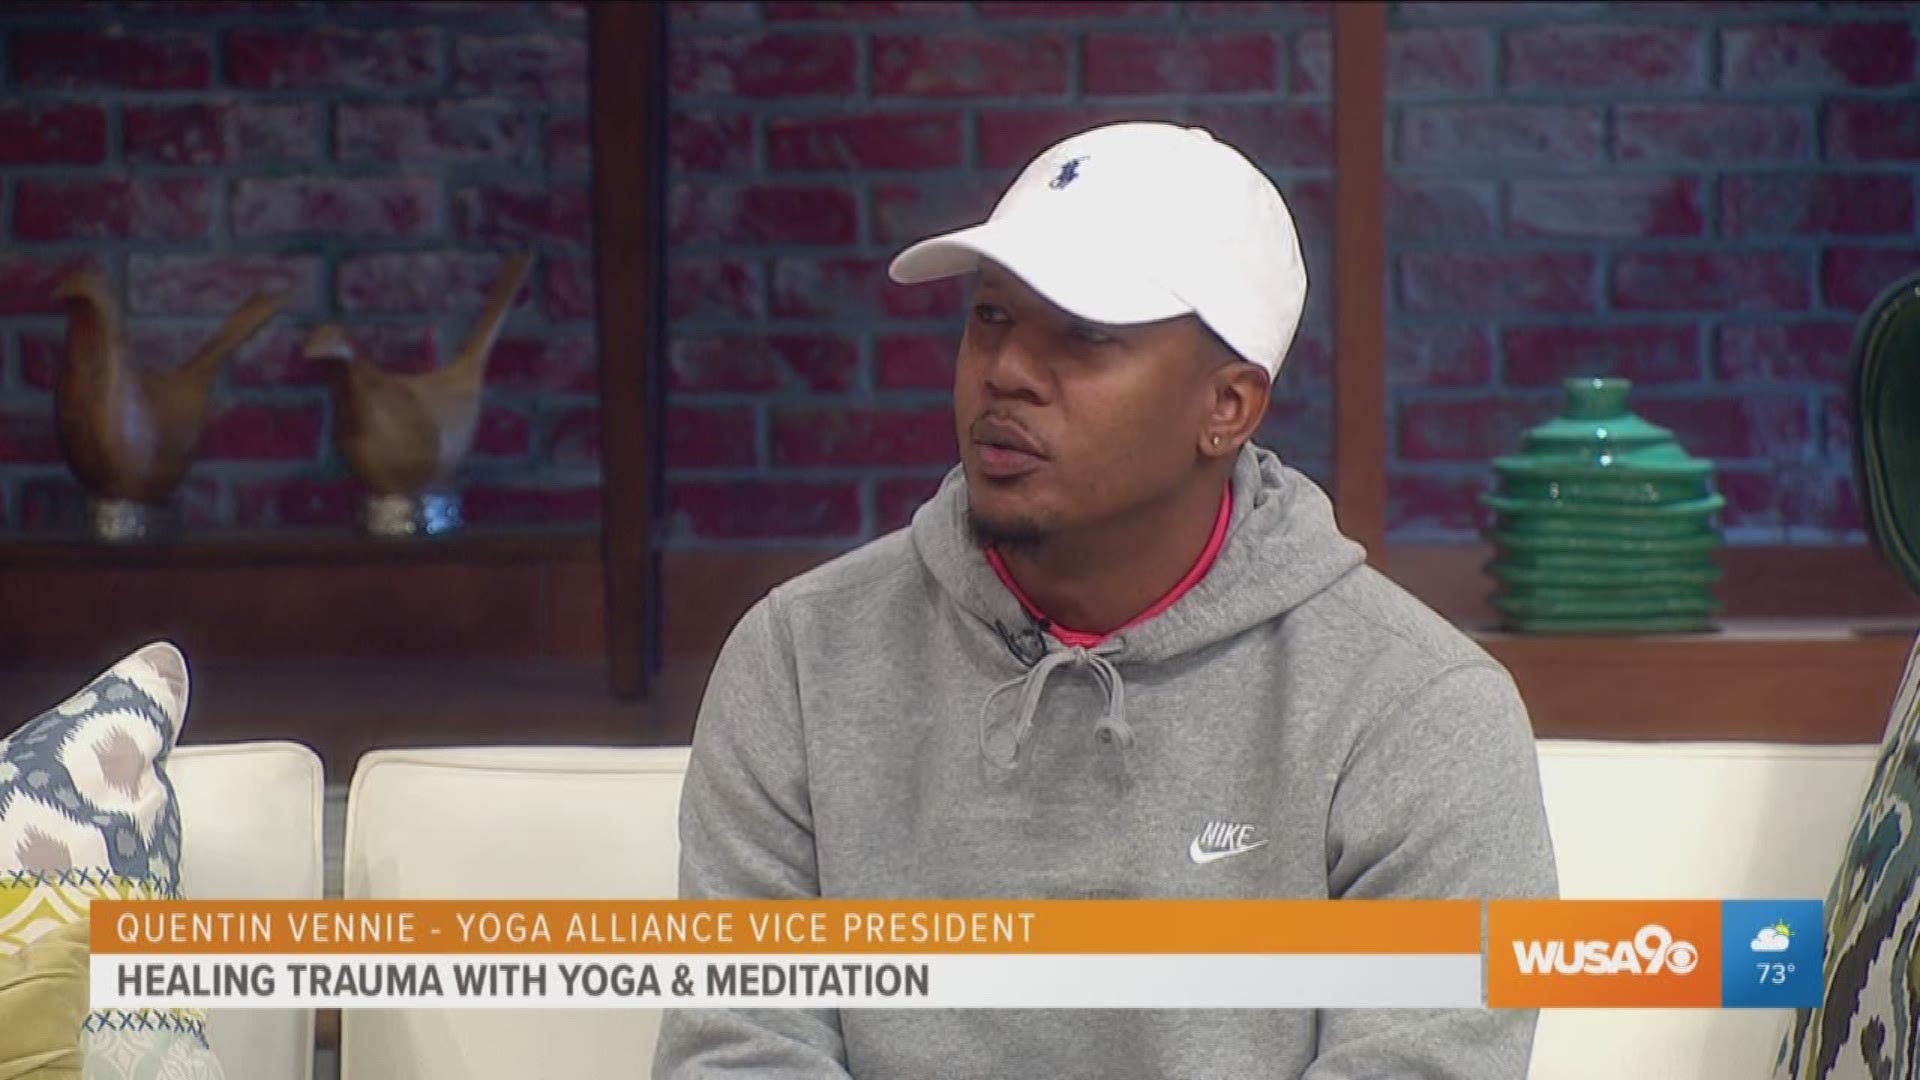 Quentin Vennie, author of 'Strong in the Broken Places: A Memoir of Addiction and Redemption Through Wellness' shares how he overcame depression and anxiety through the practice of yoga and meditation.